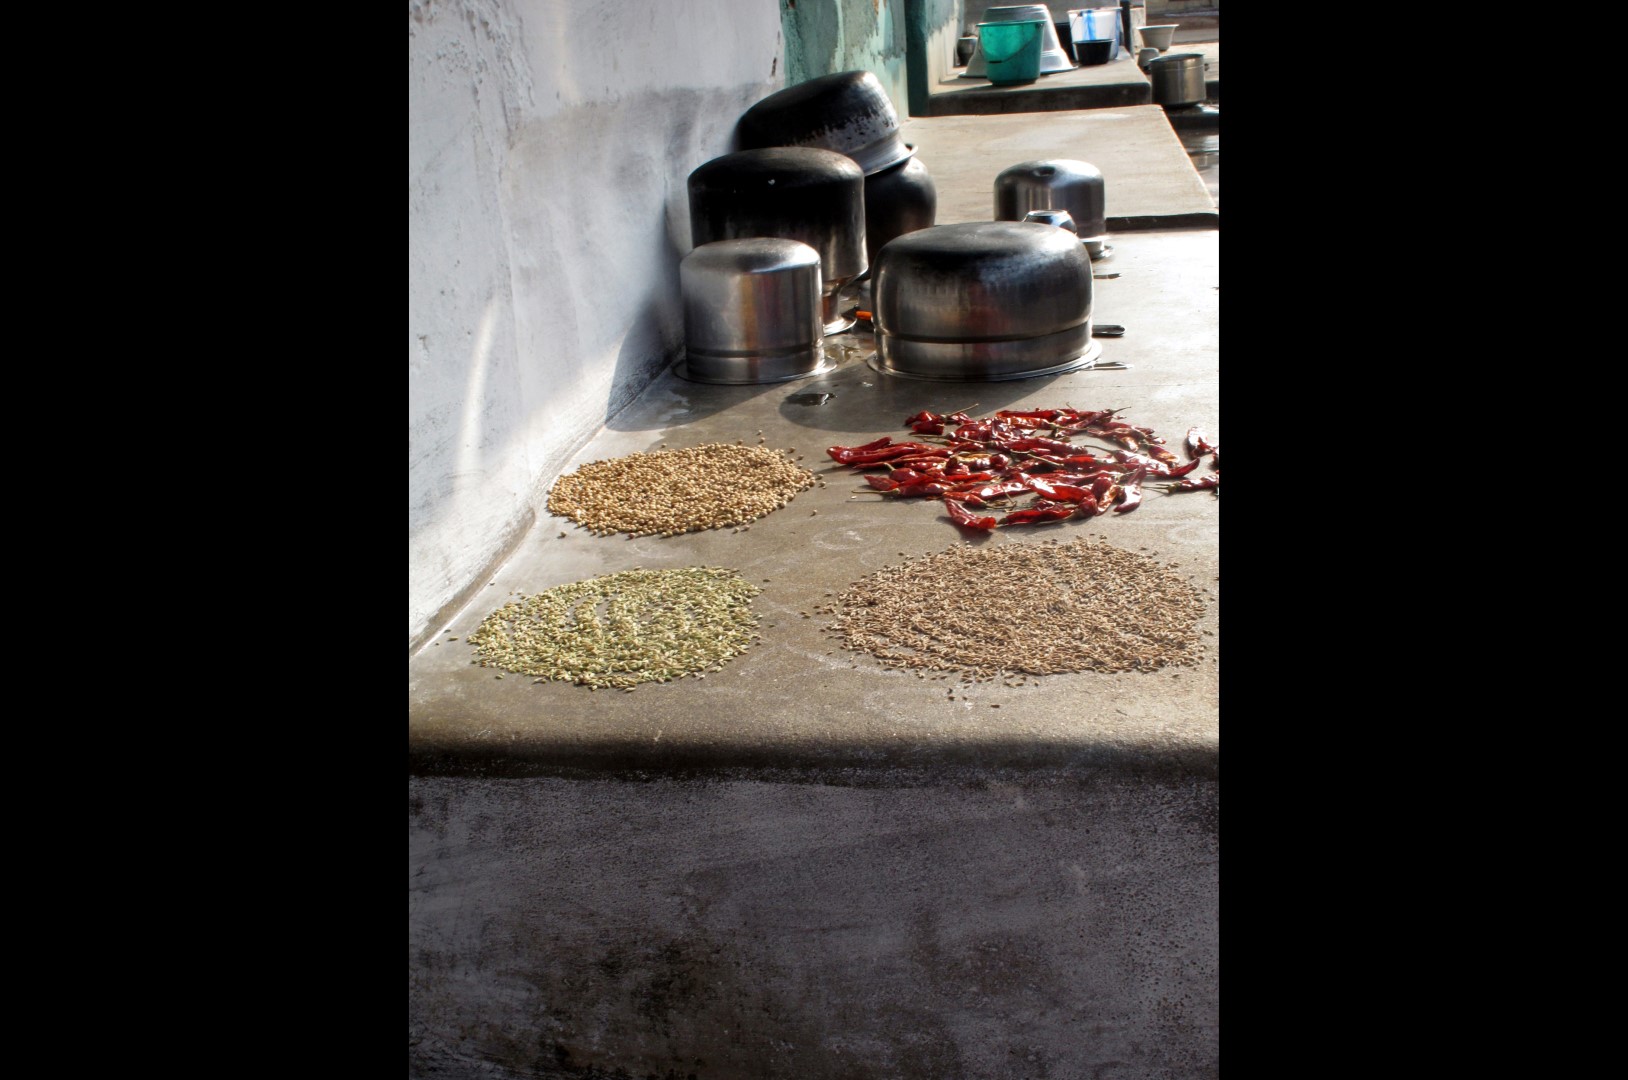 The spices for our lunch drying in the sun